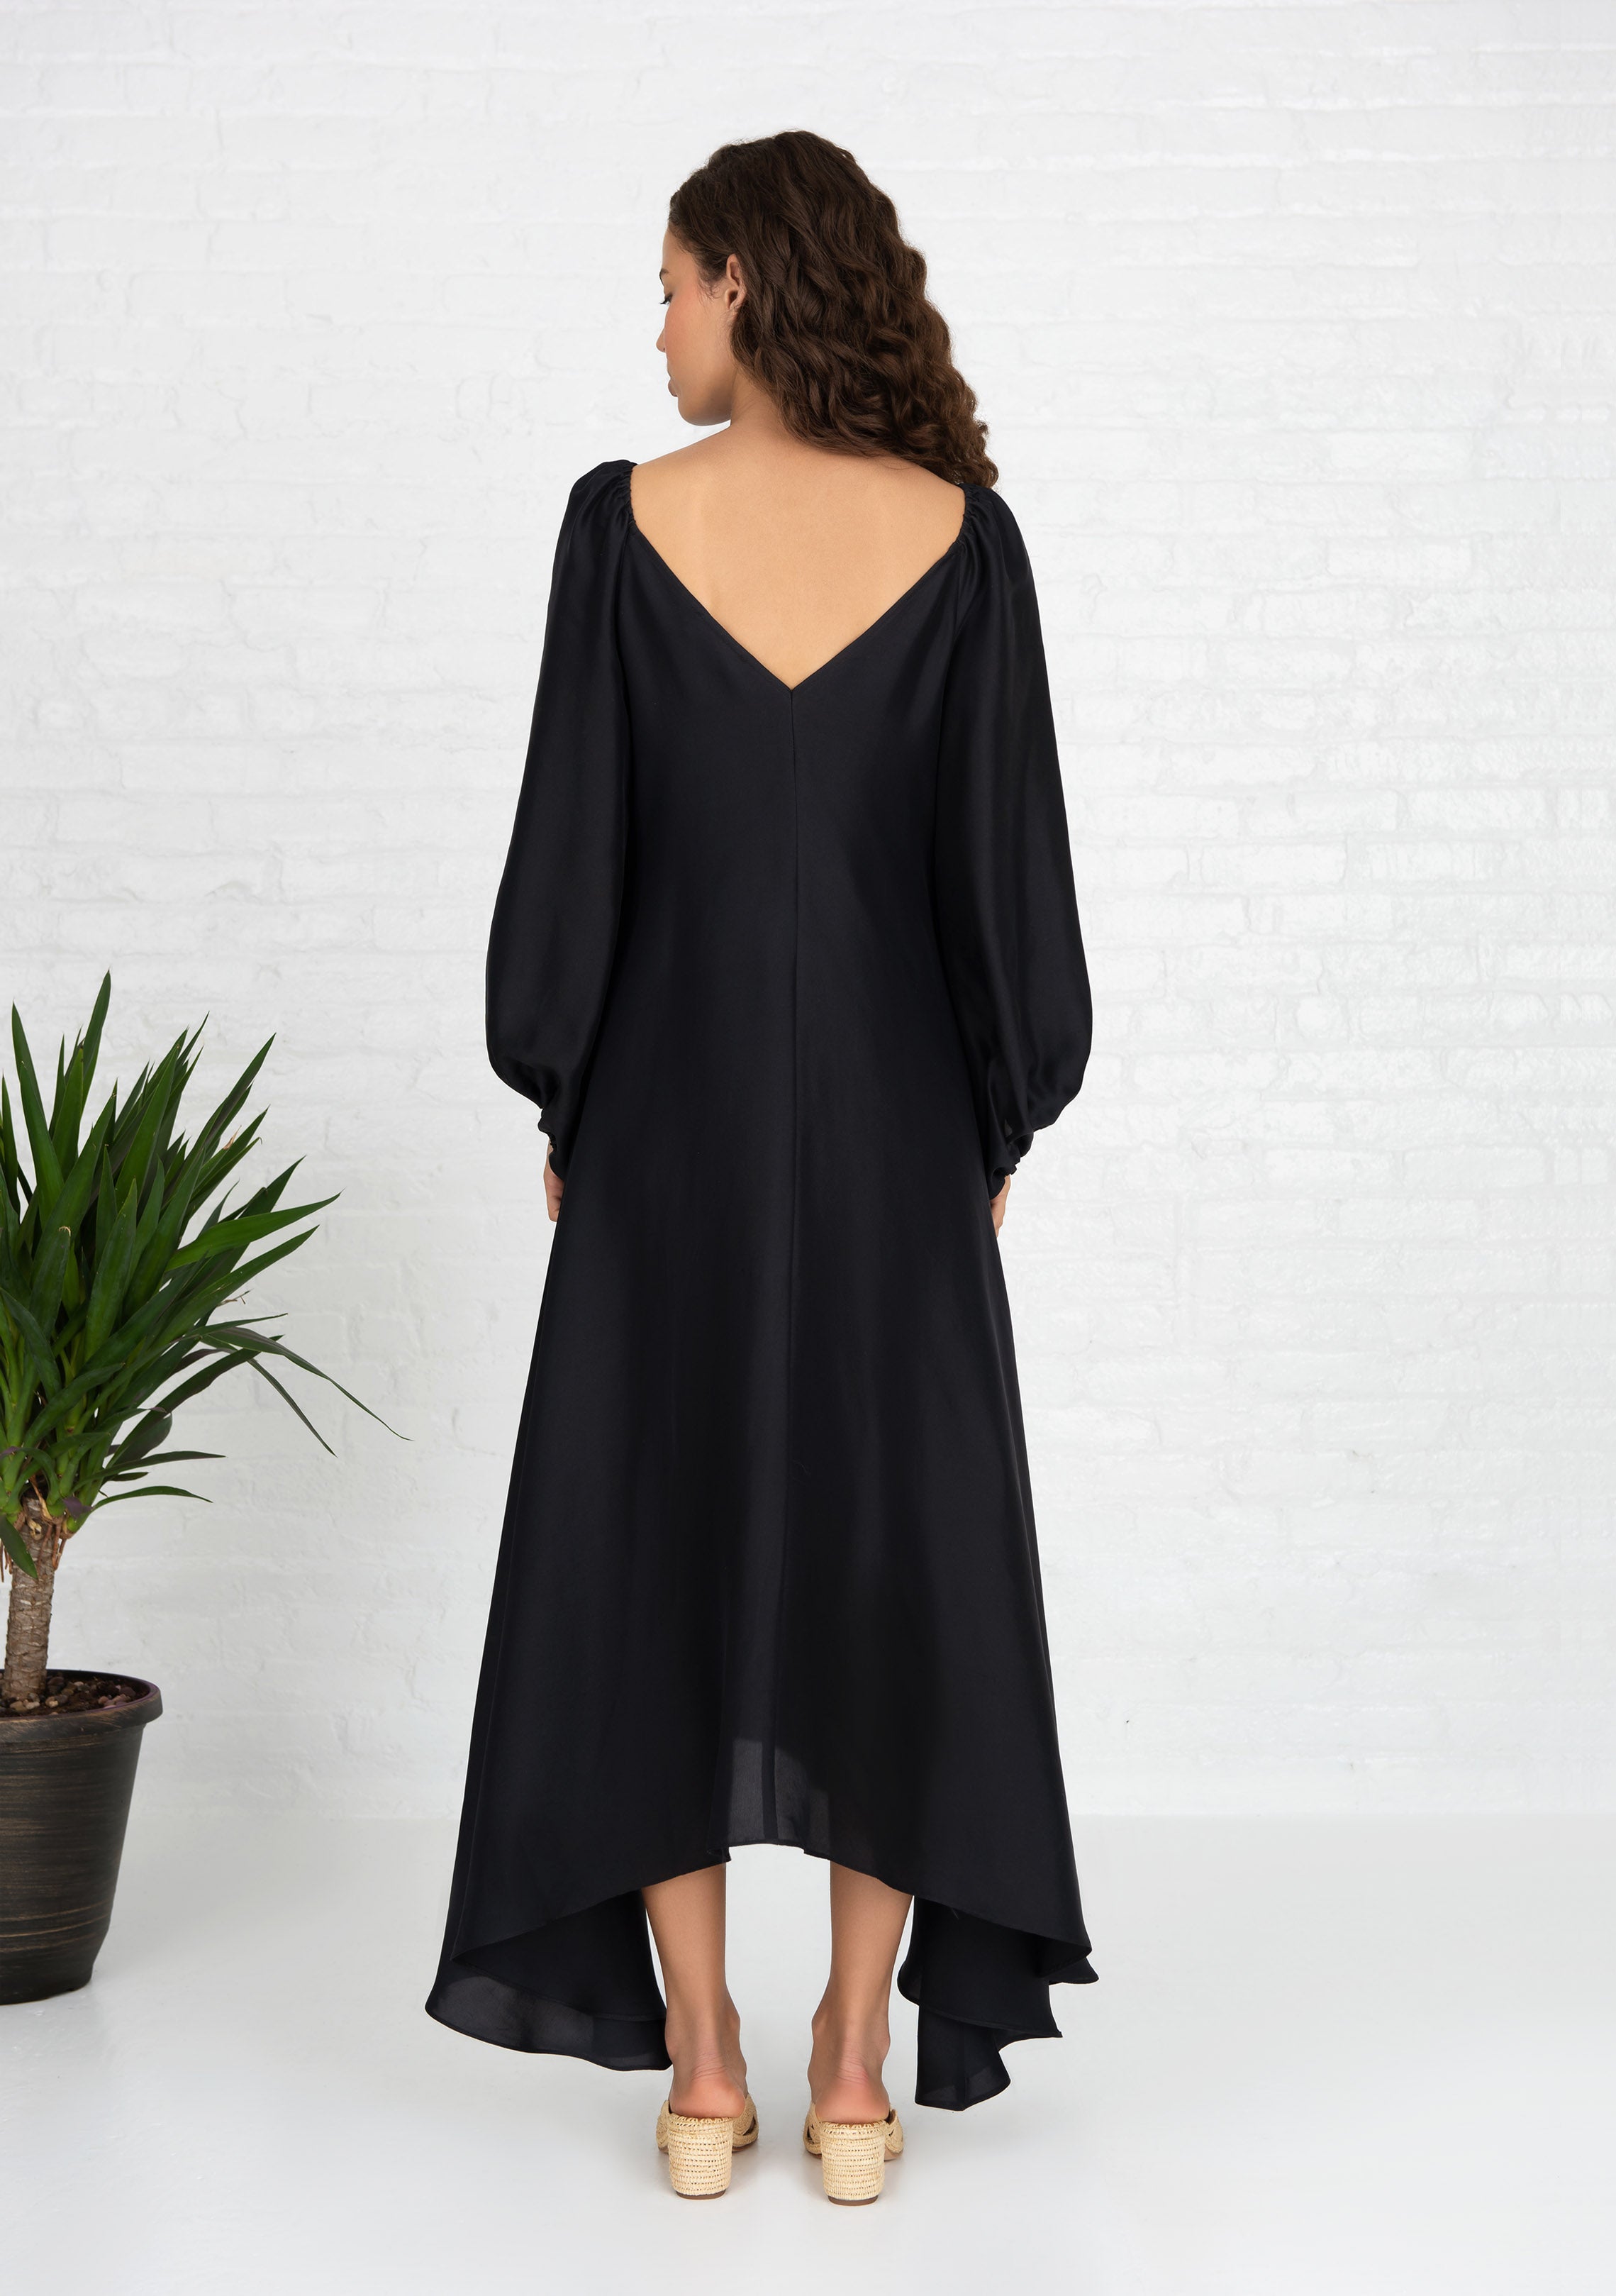 back view of woman wearing black puff sleeve silk dress front and back v neck with heels